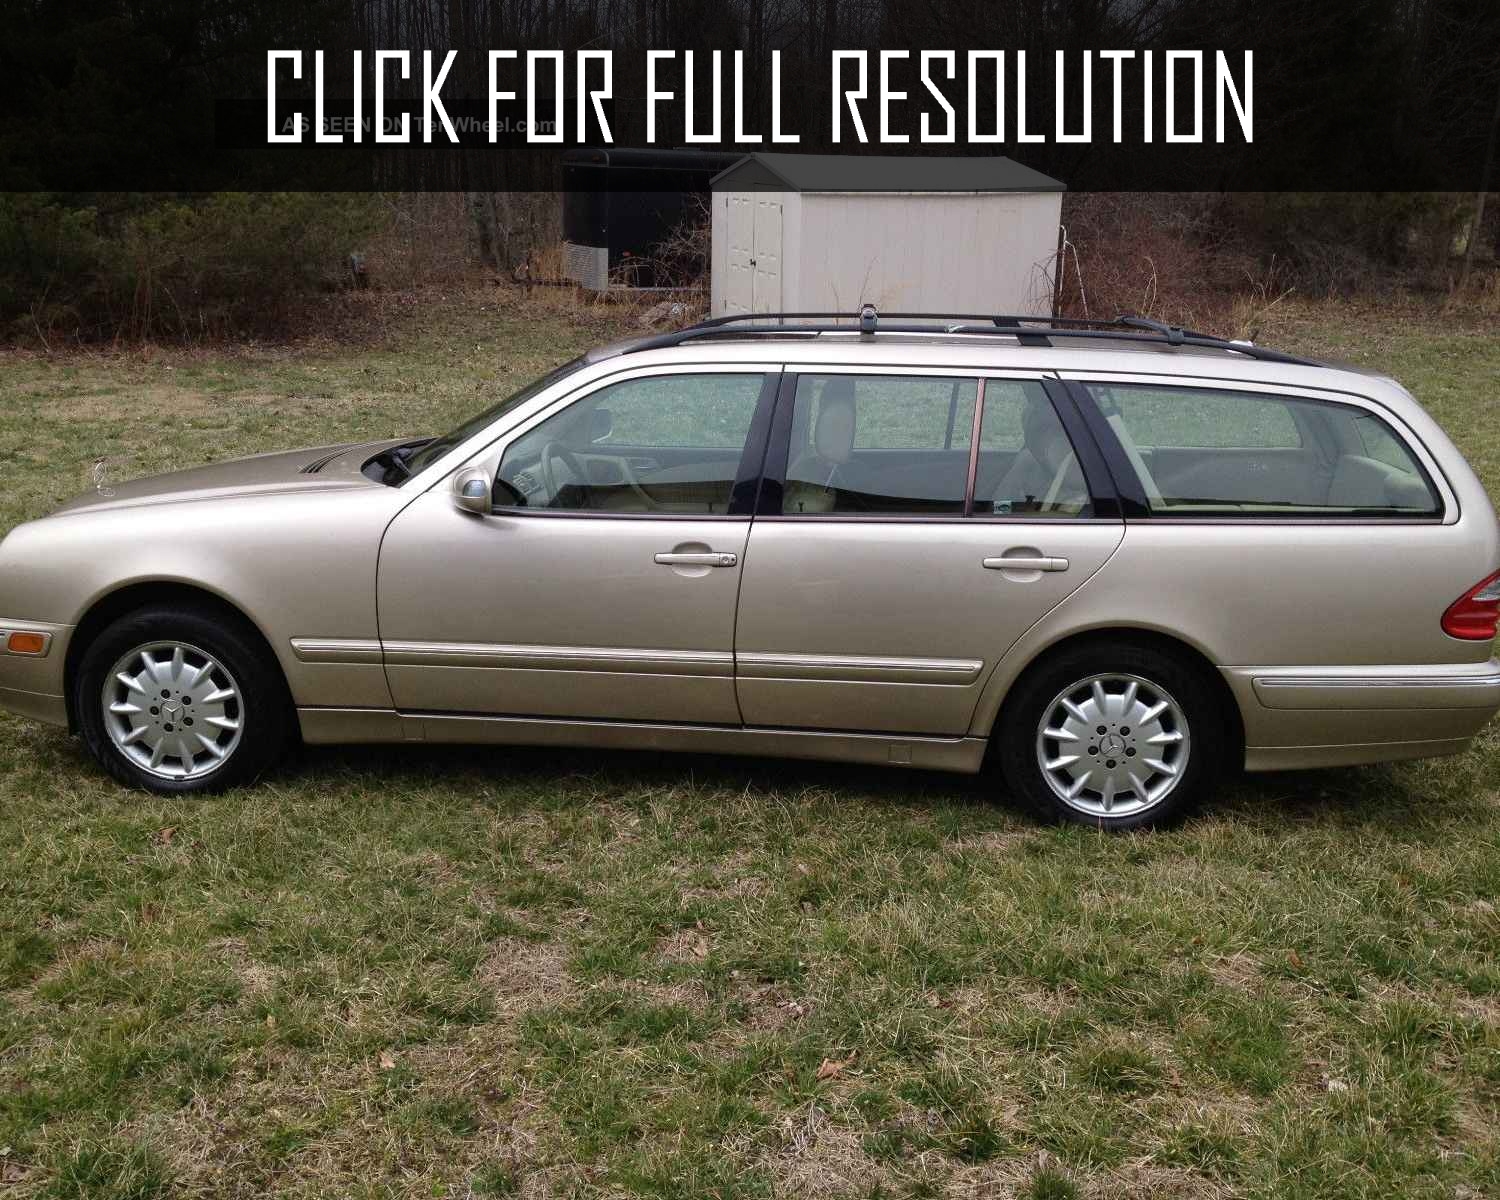 2002 Mercedes Benz E Class Wagon best image gallery #7/19 - share and download